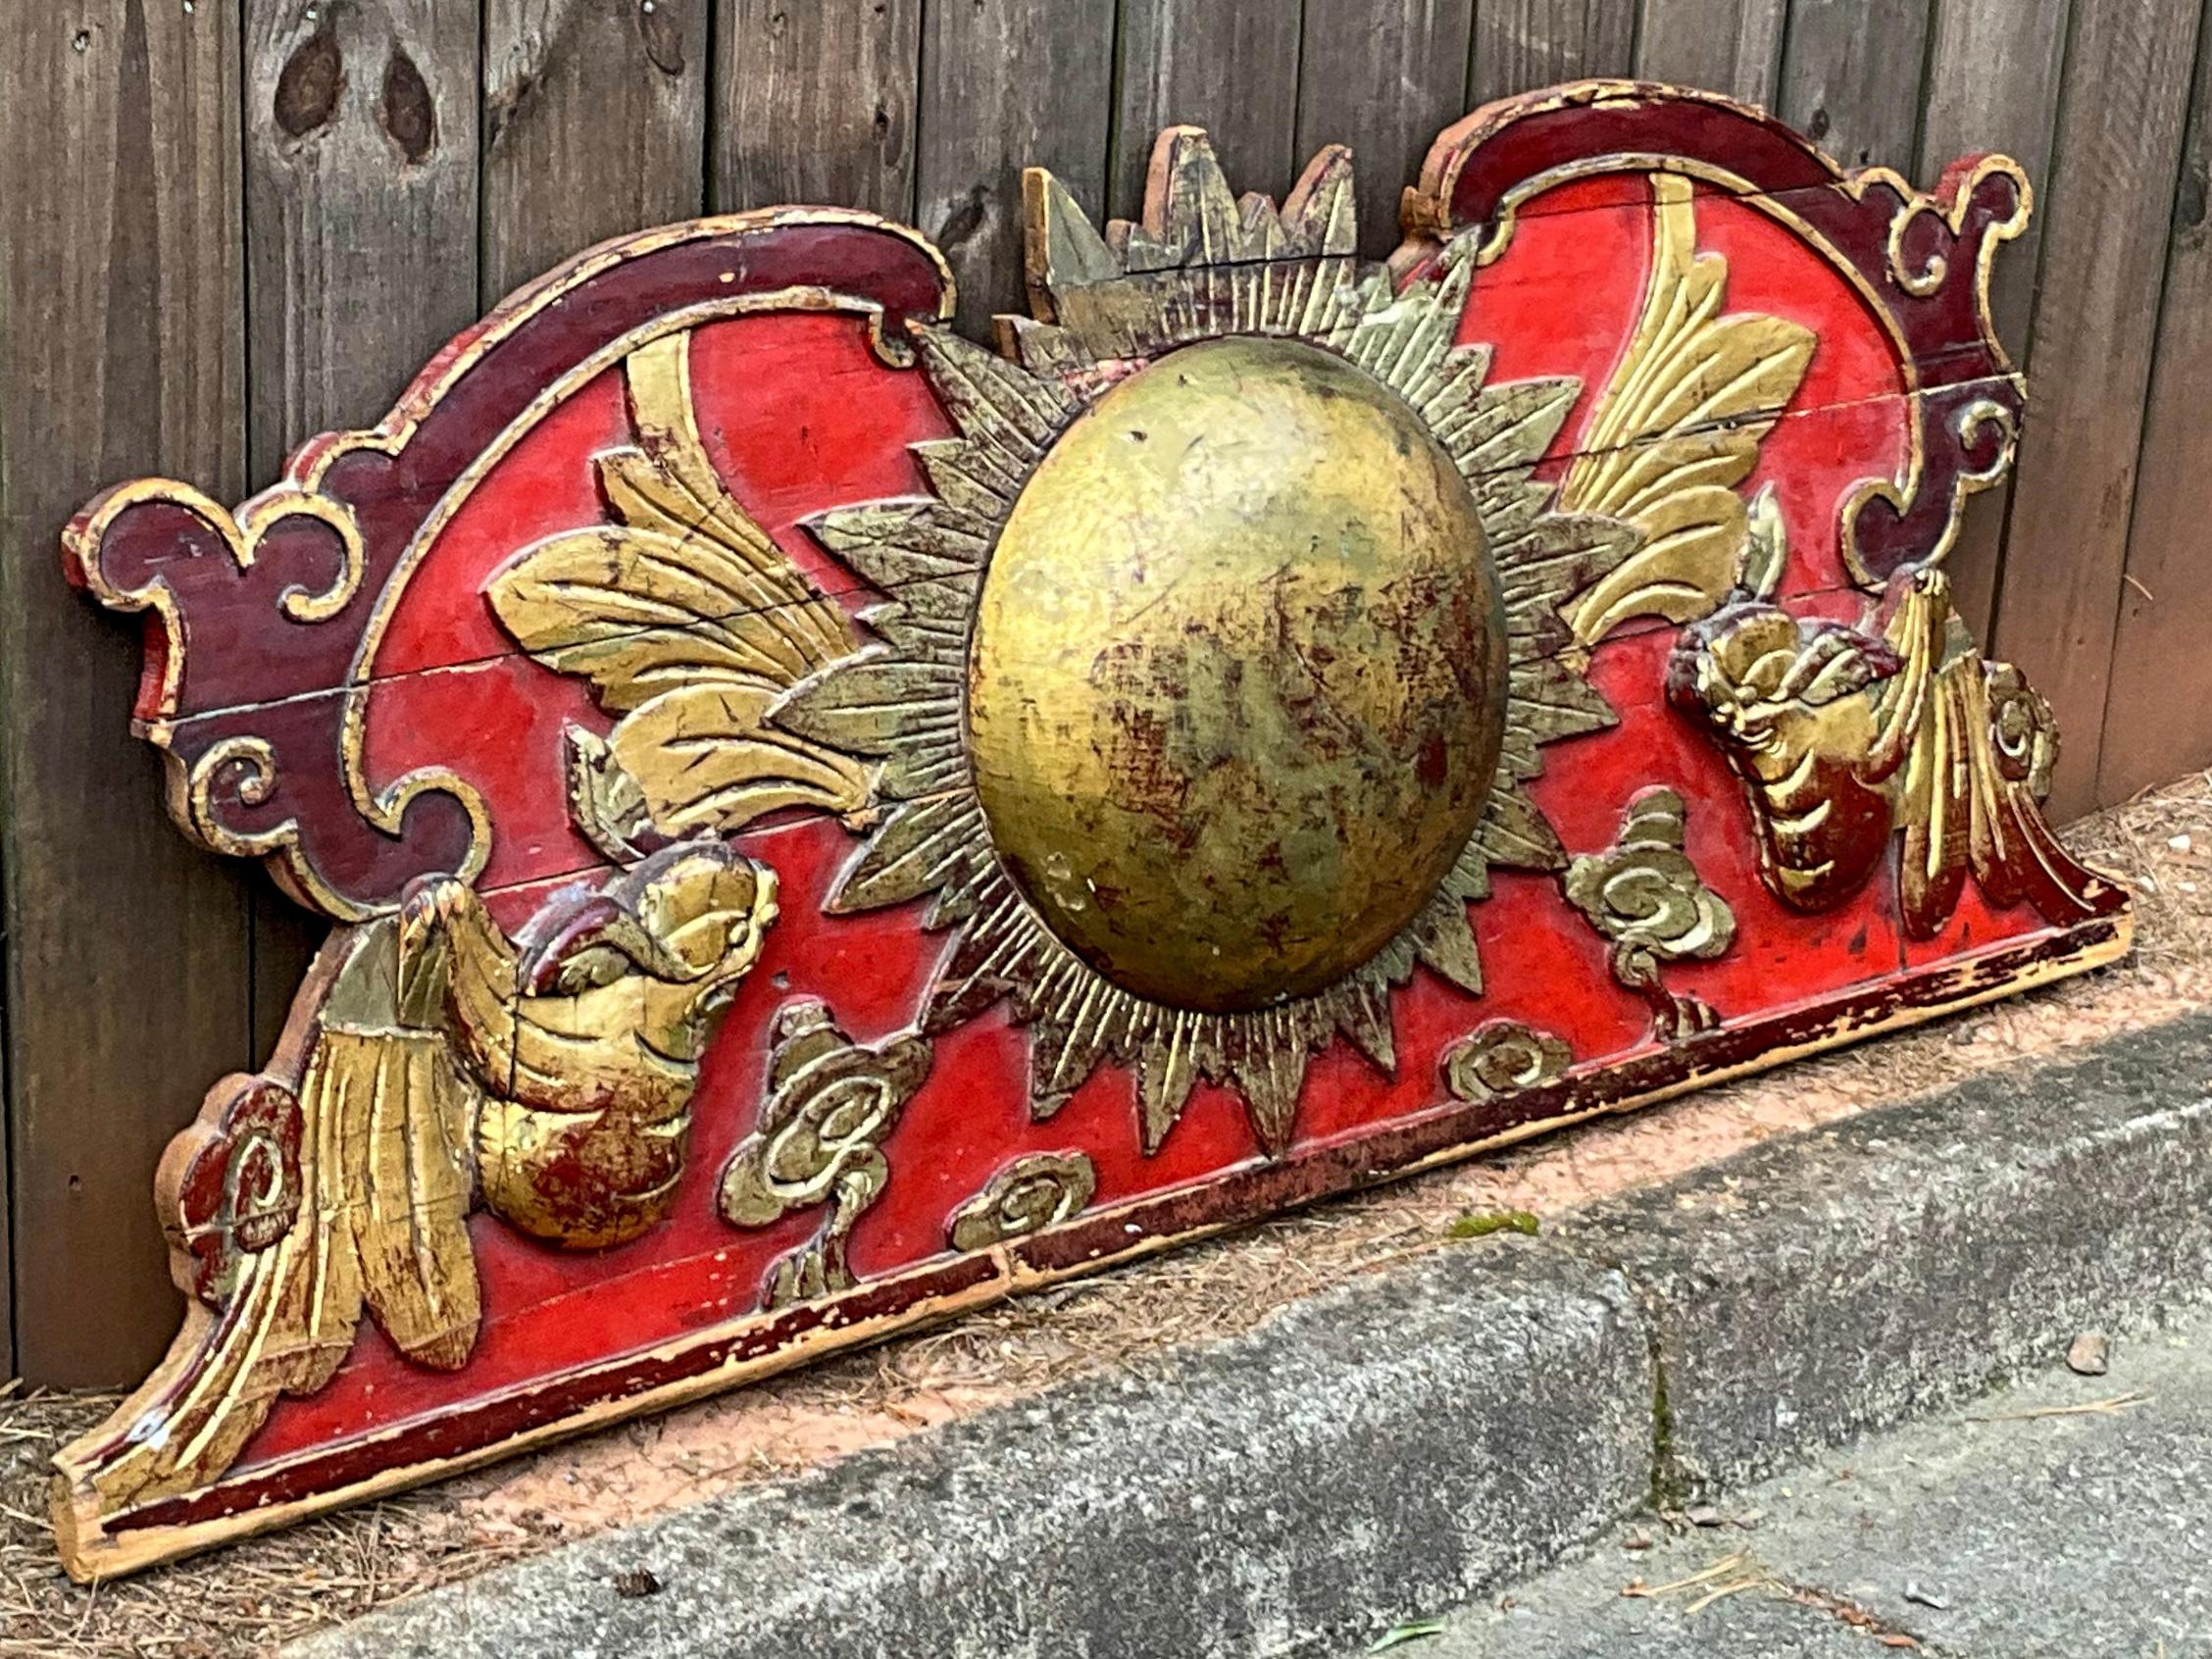 I love this piece! This is a large scale 19th century carved wood Chinese fragment in vivid reds and golds with a dramatic sunburst focal point. It has almost a Rococo Italianate feel to it. This architectural element would look fantastic over an